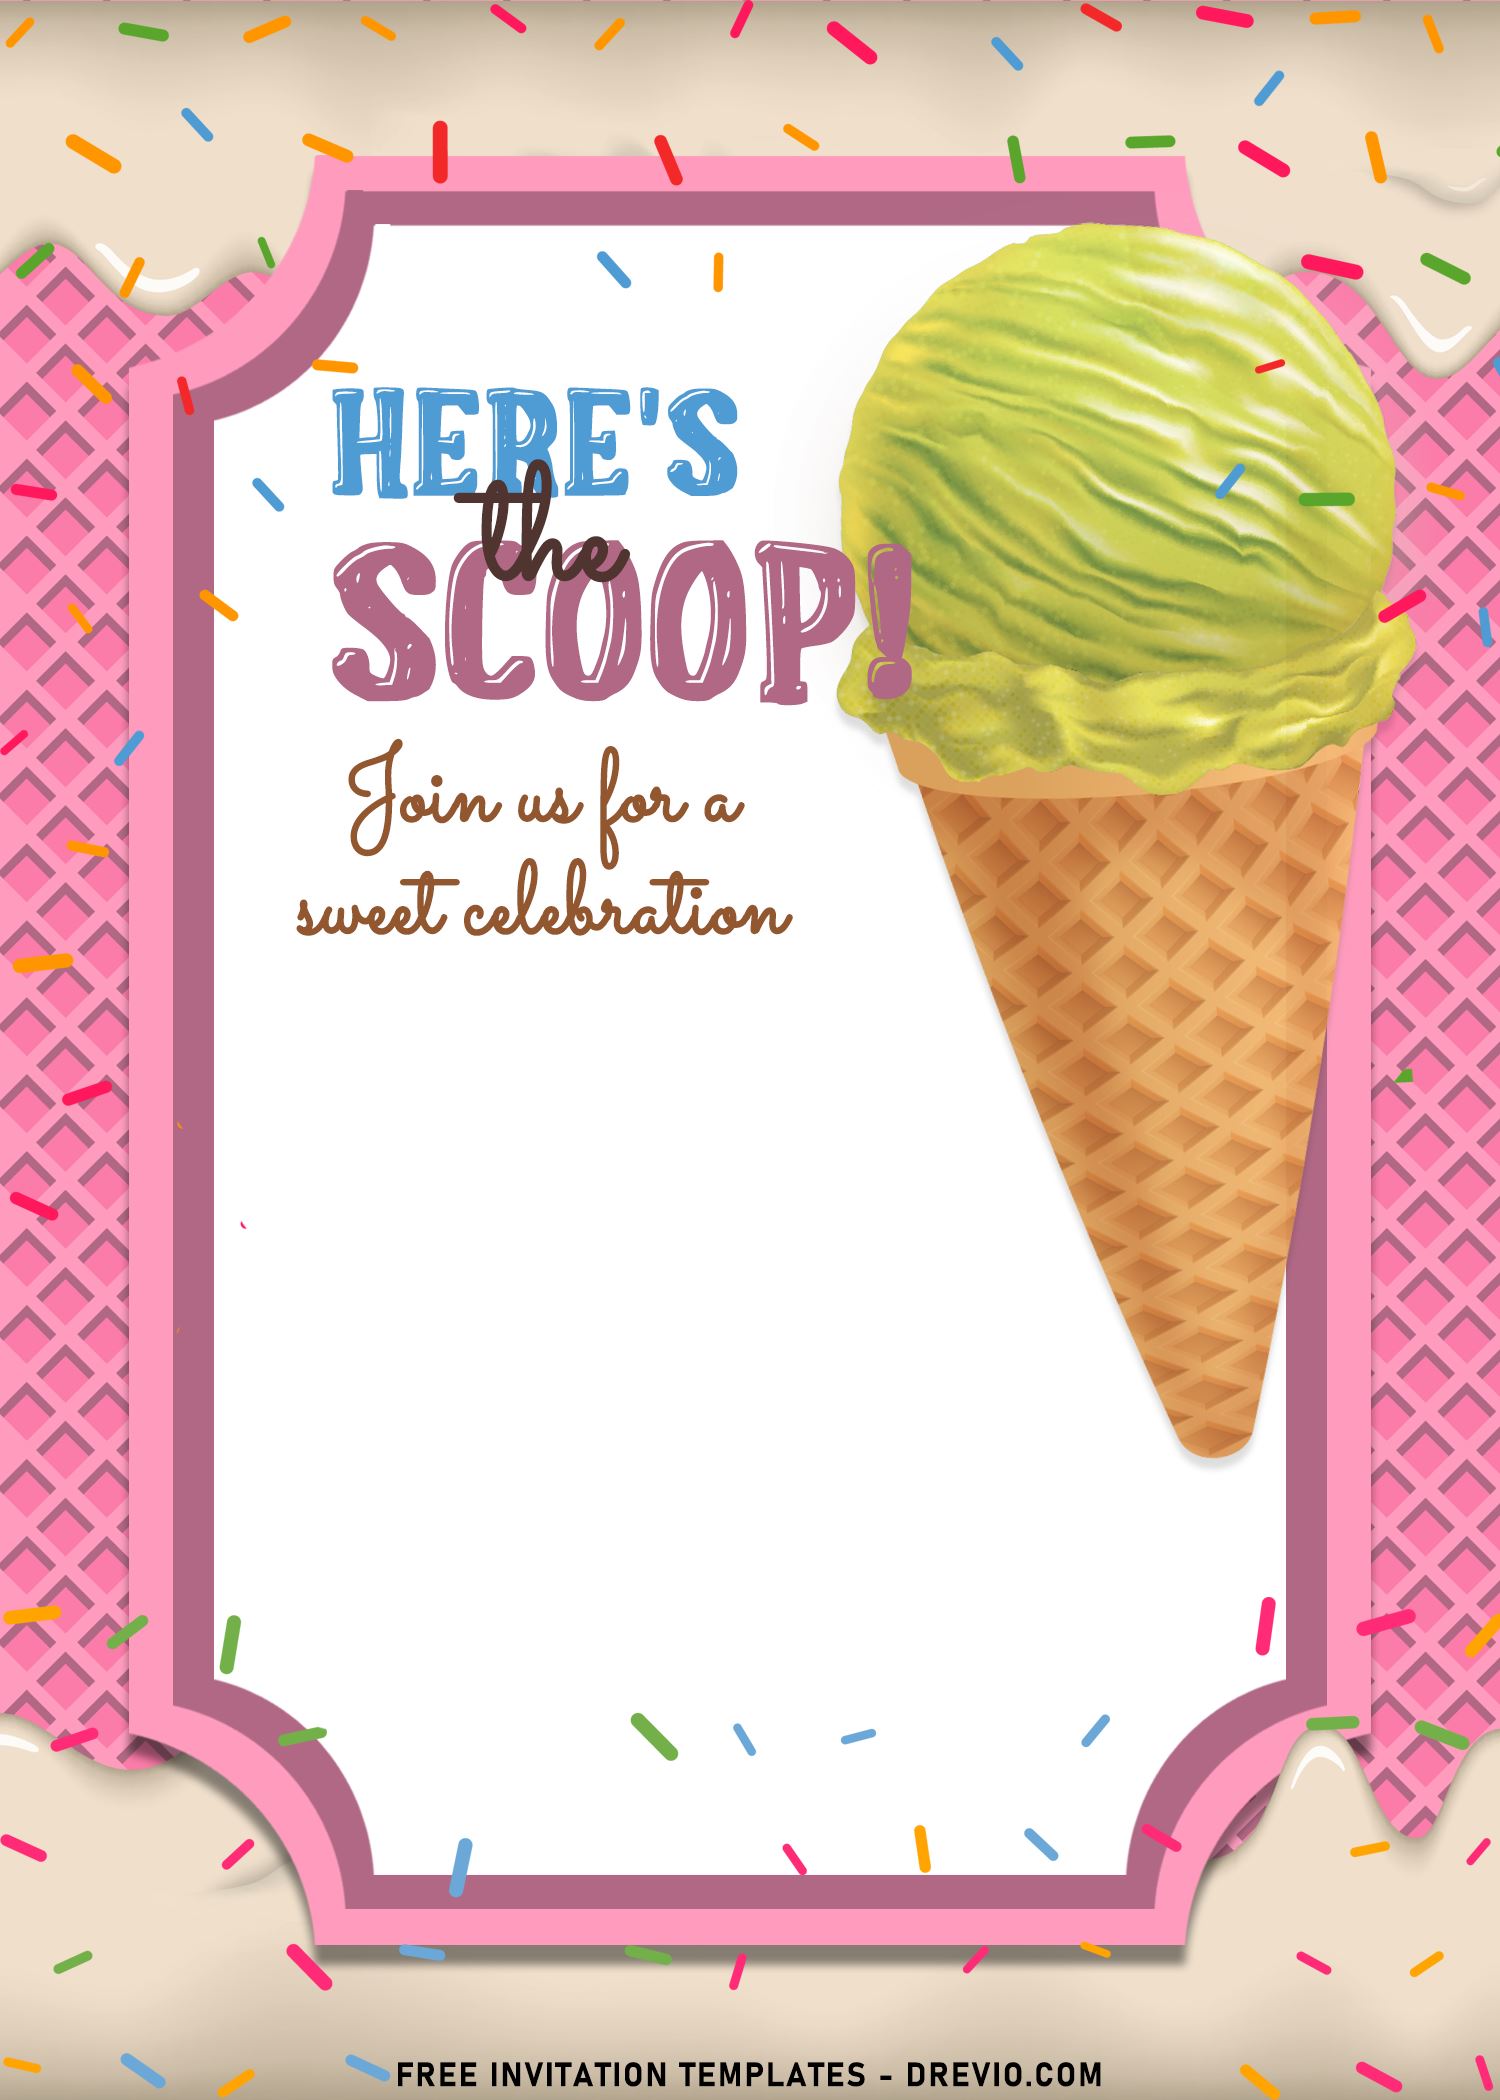 9-ice-cream-party-invitation-templates-for-kids-download-hundreds